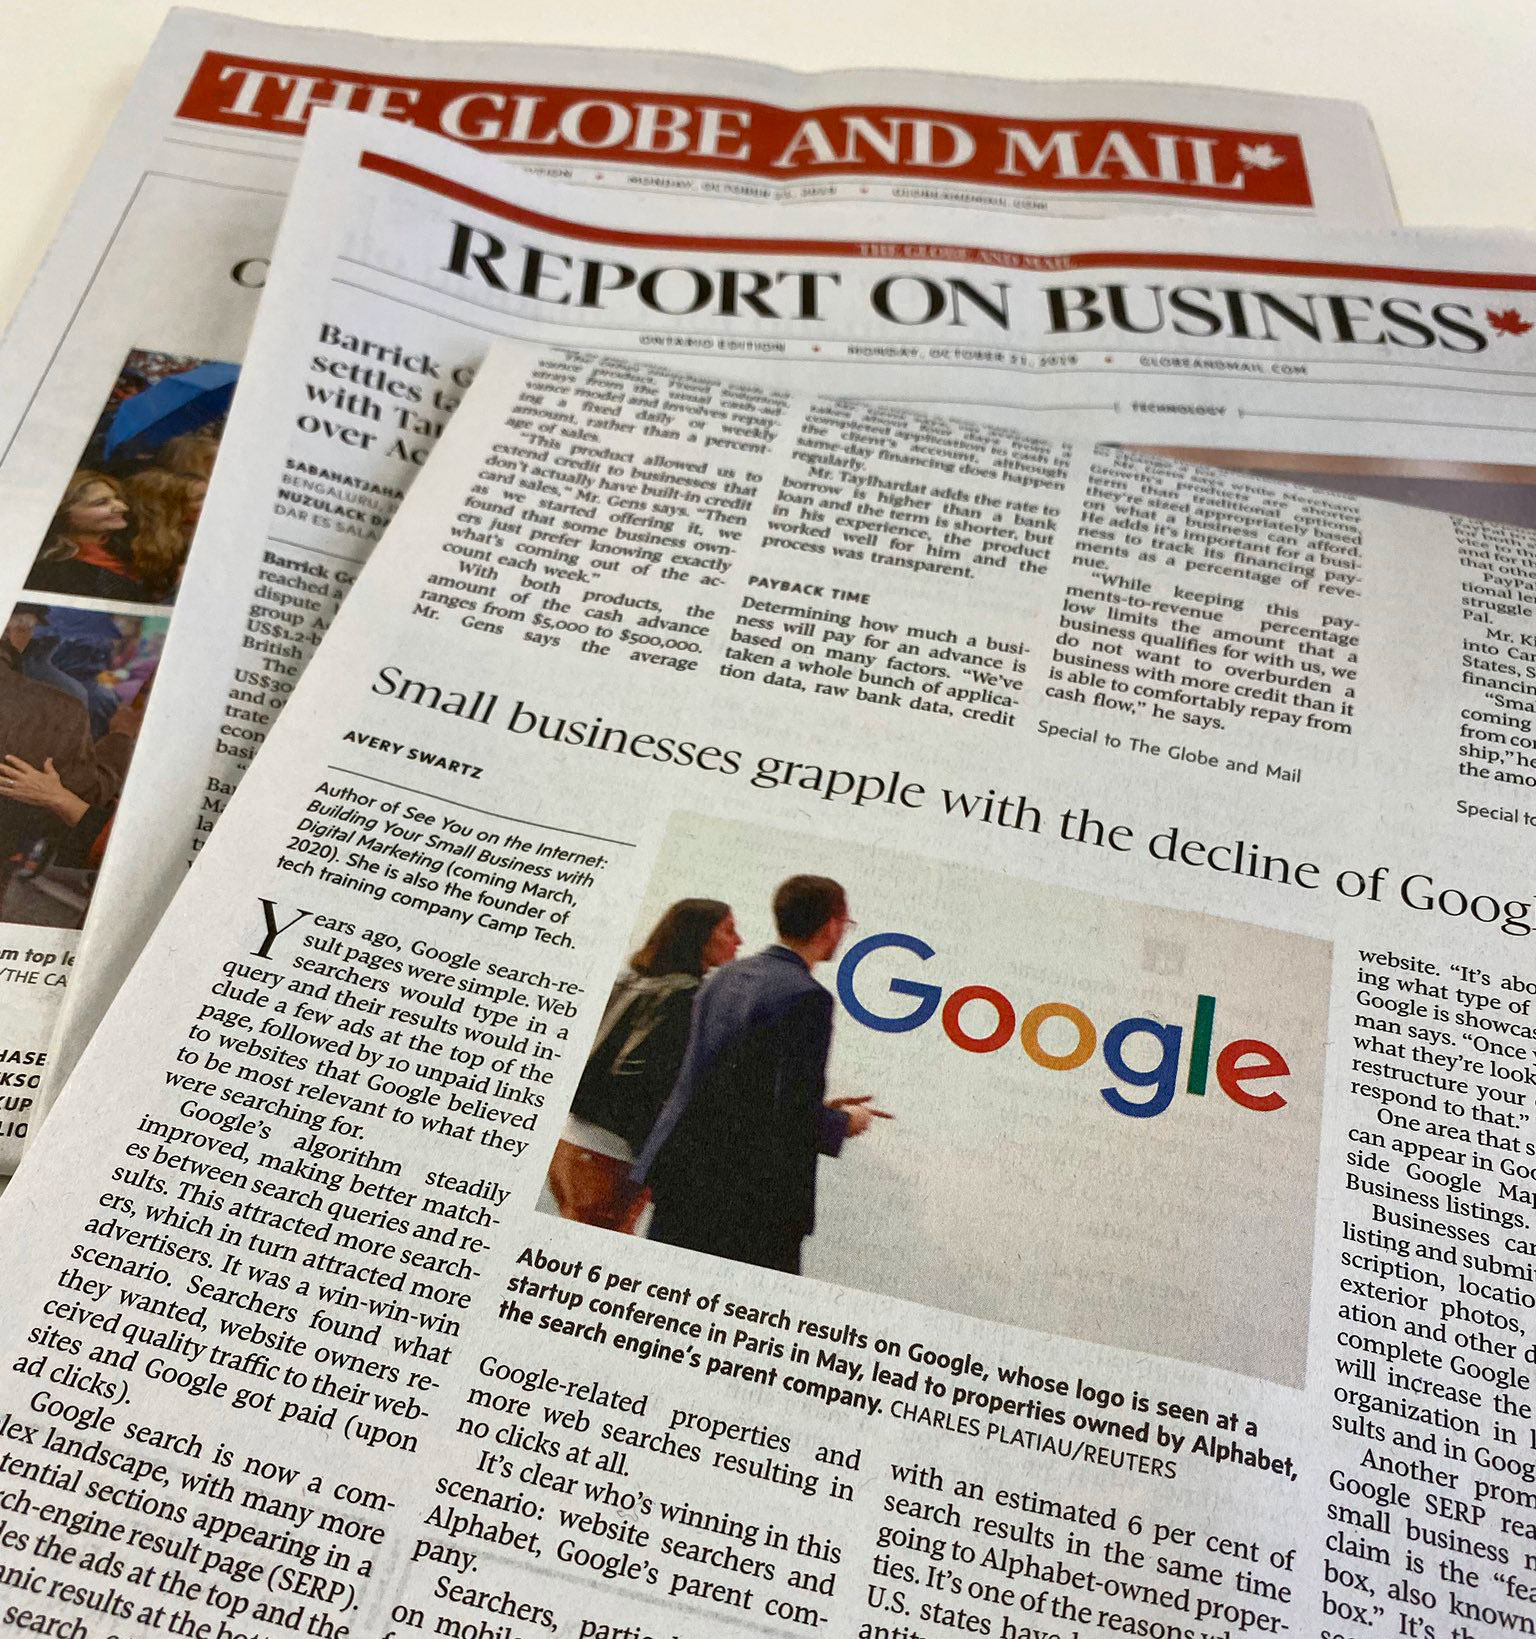 print edition of Globe and Mail newspaper with article by Avery Swartz